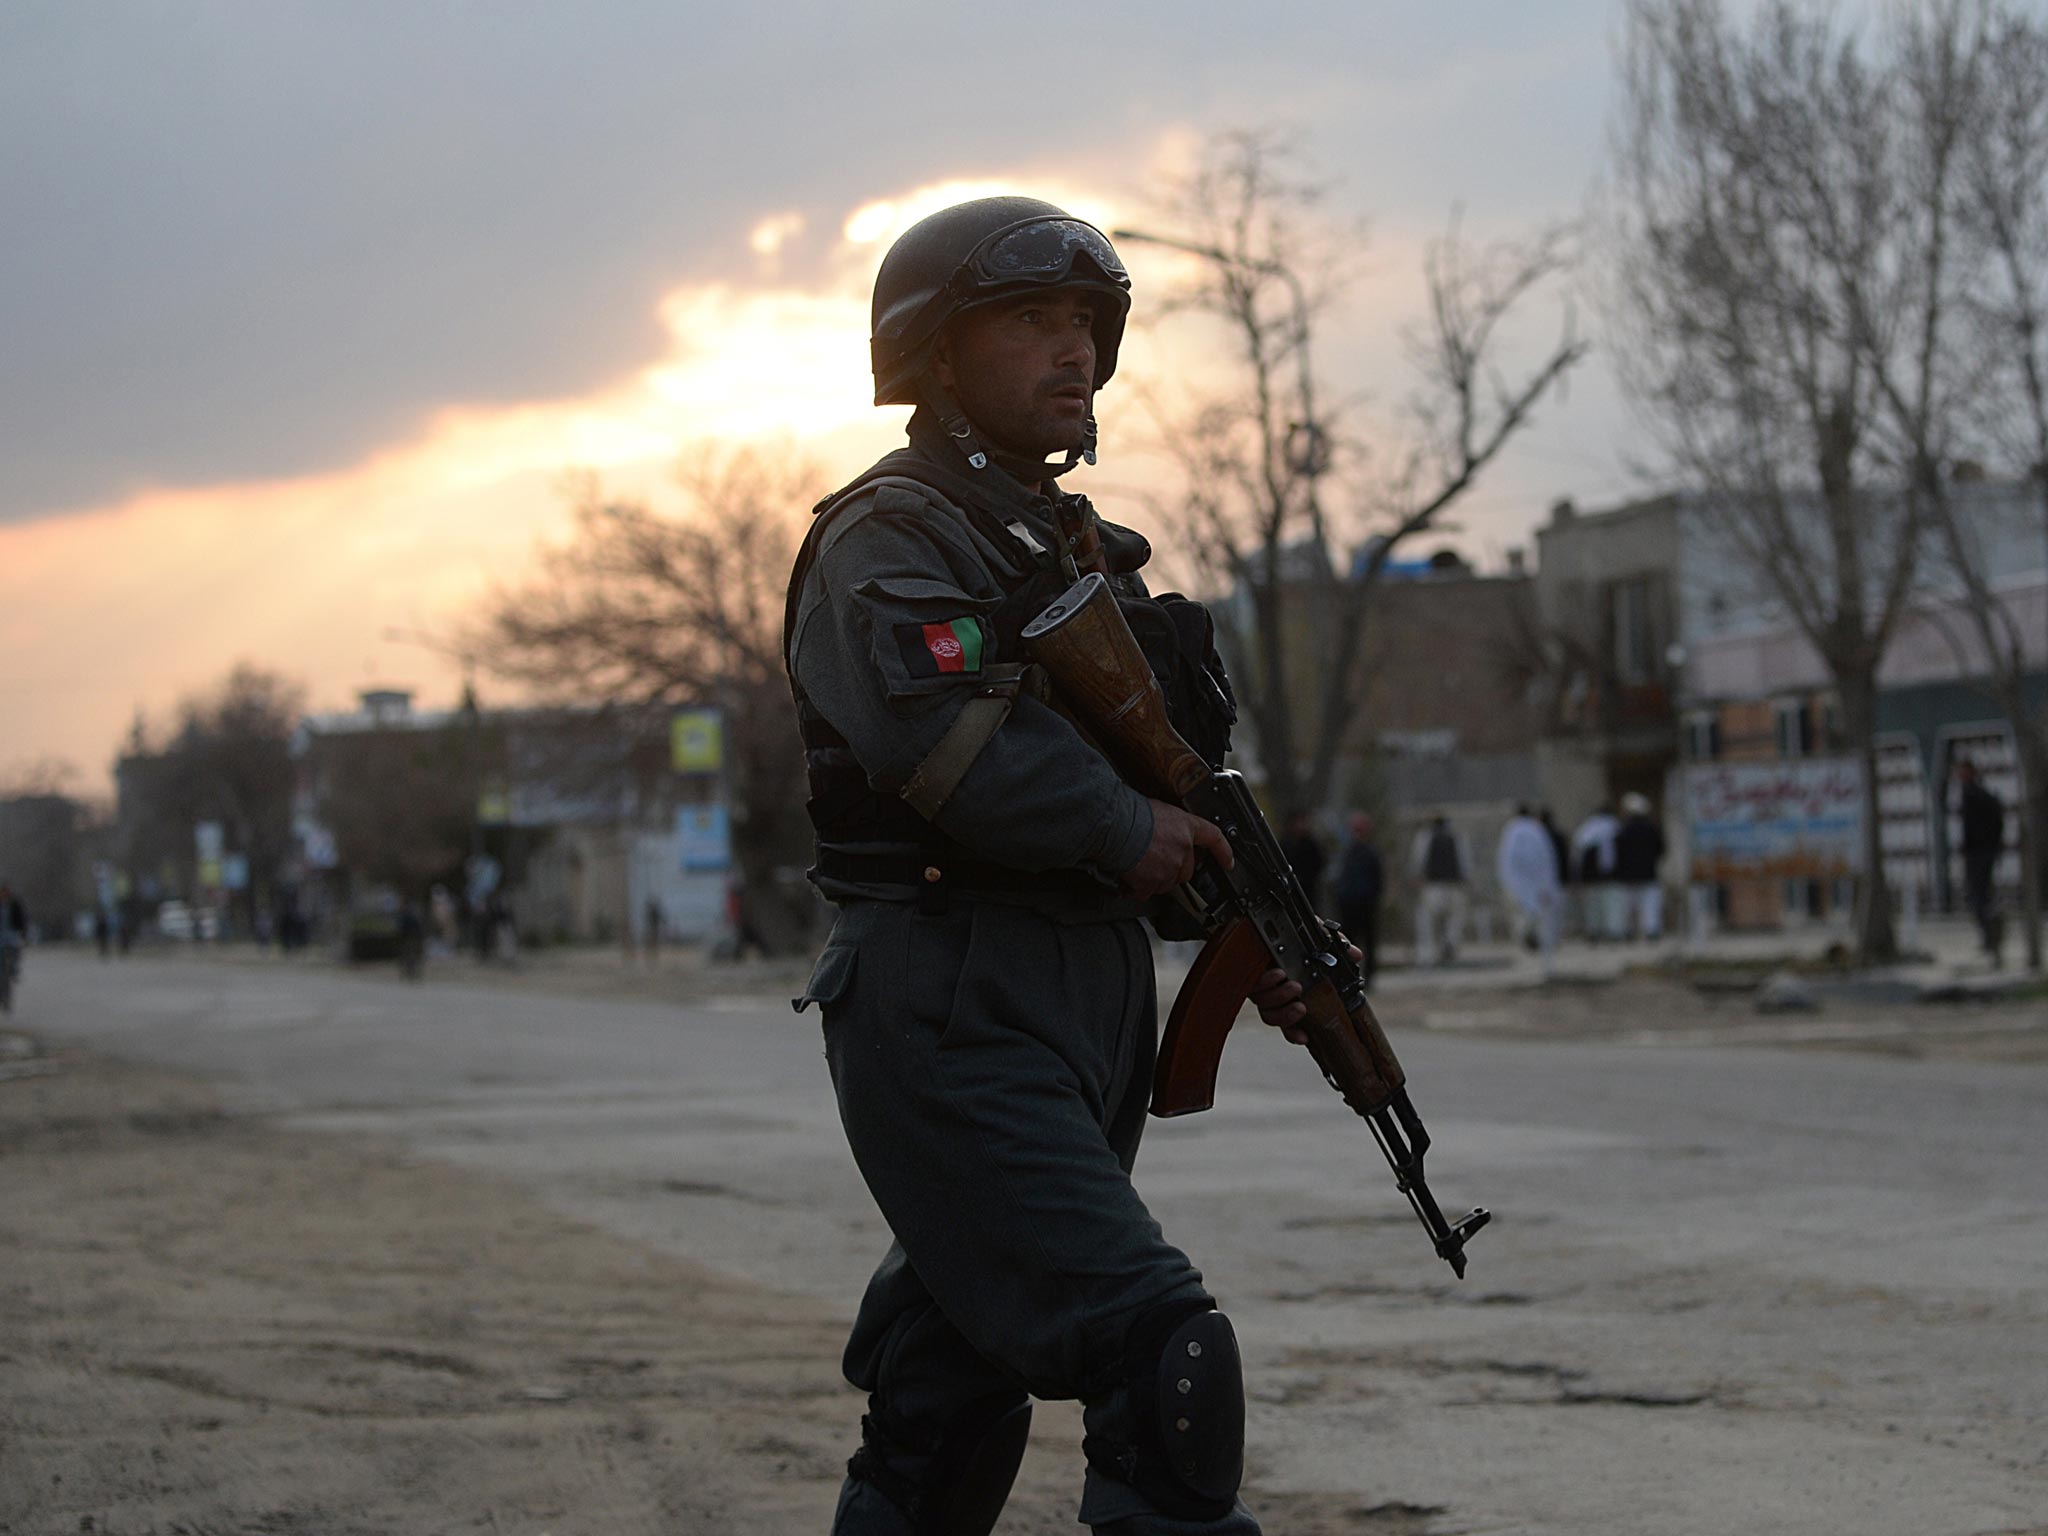 Kabul is already on high alert and people across the country are on edge